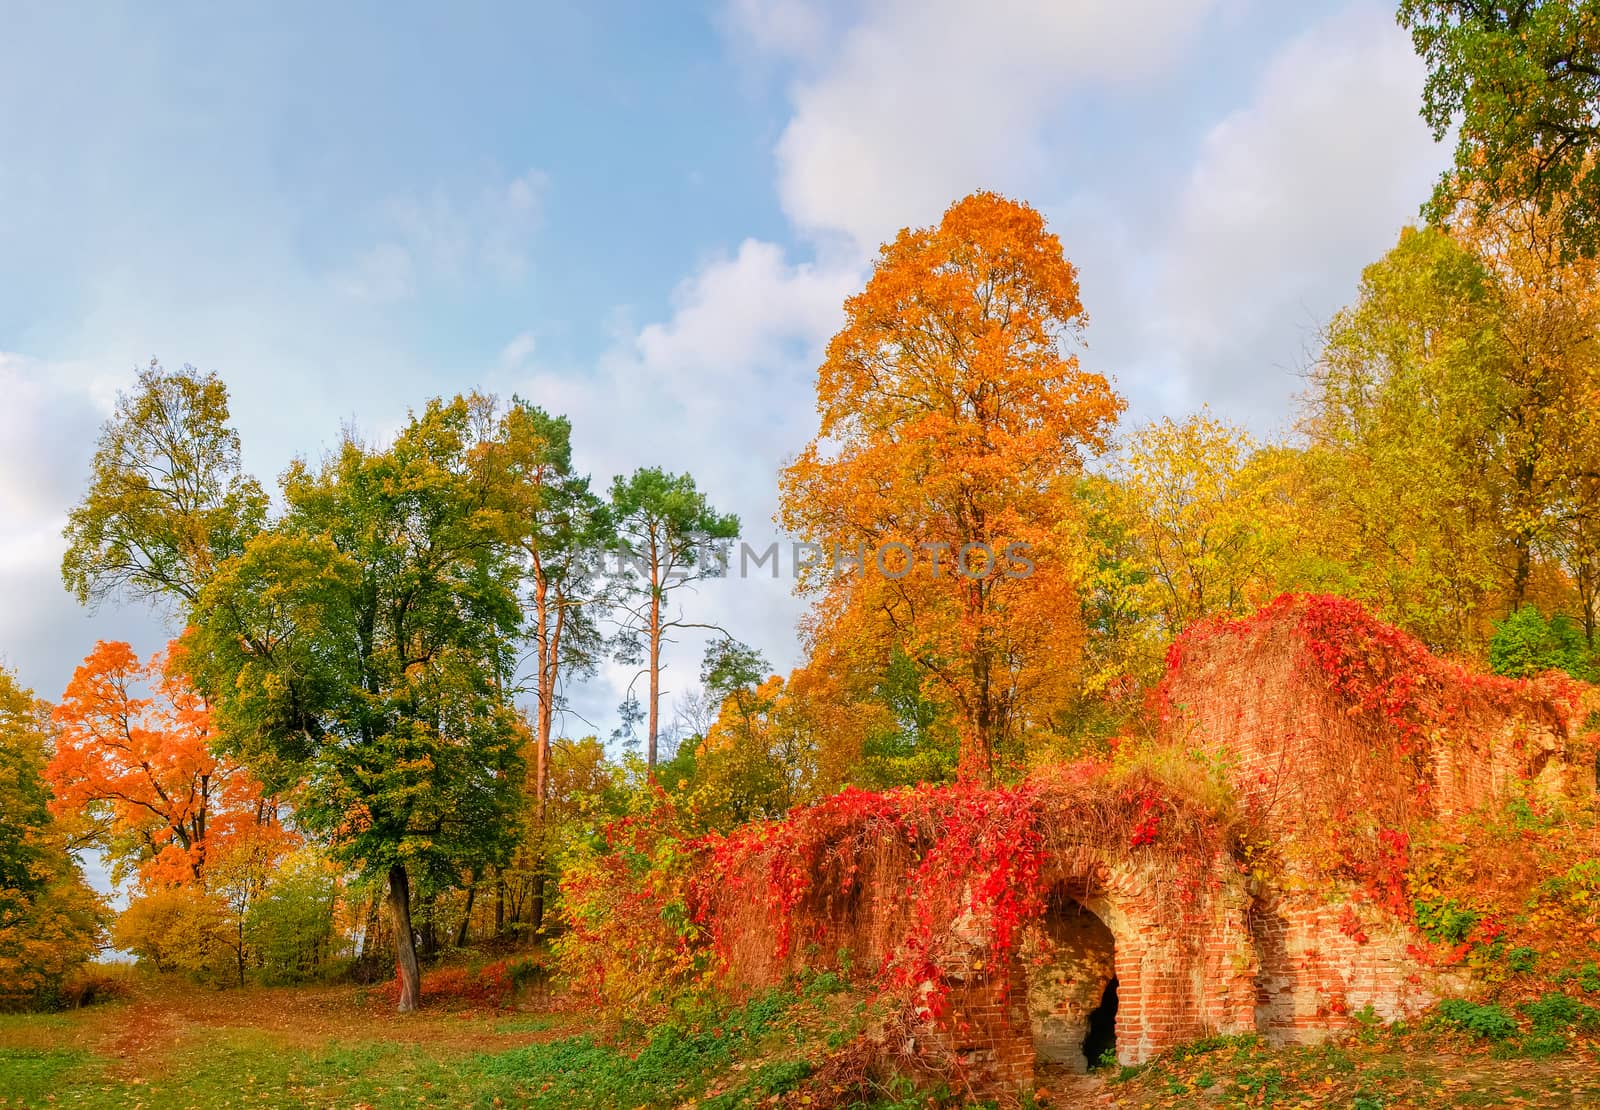 Fragment of the autumn landscape park with decorative ruins made of red bricks and covered with ivy with red leaves in foreground
